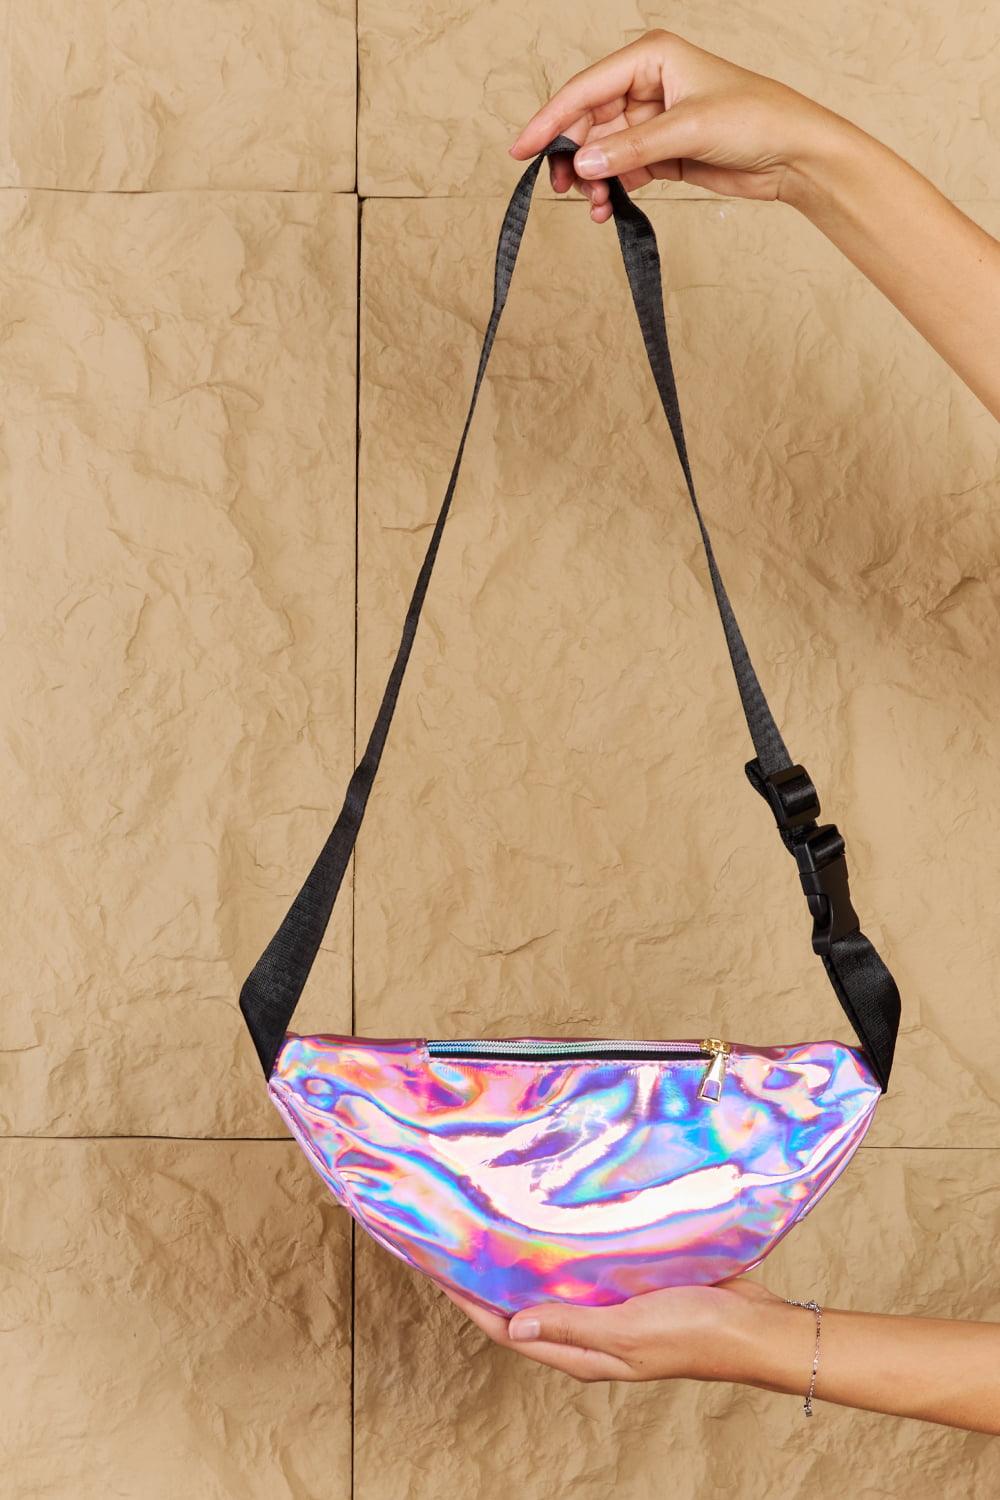 Good Vibrations Holographic Double Zipper Fanny Pack in Hot Pink - Studio 653